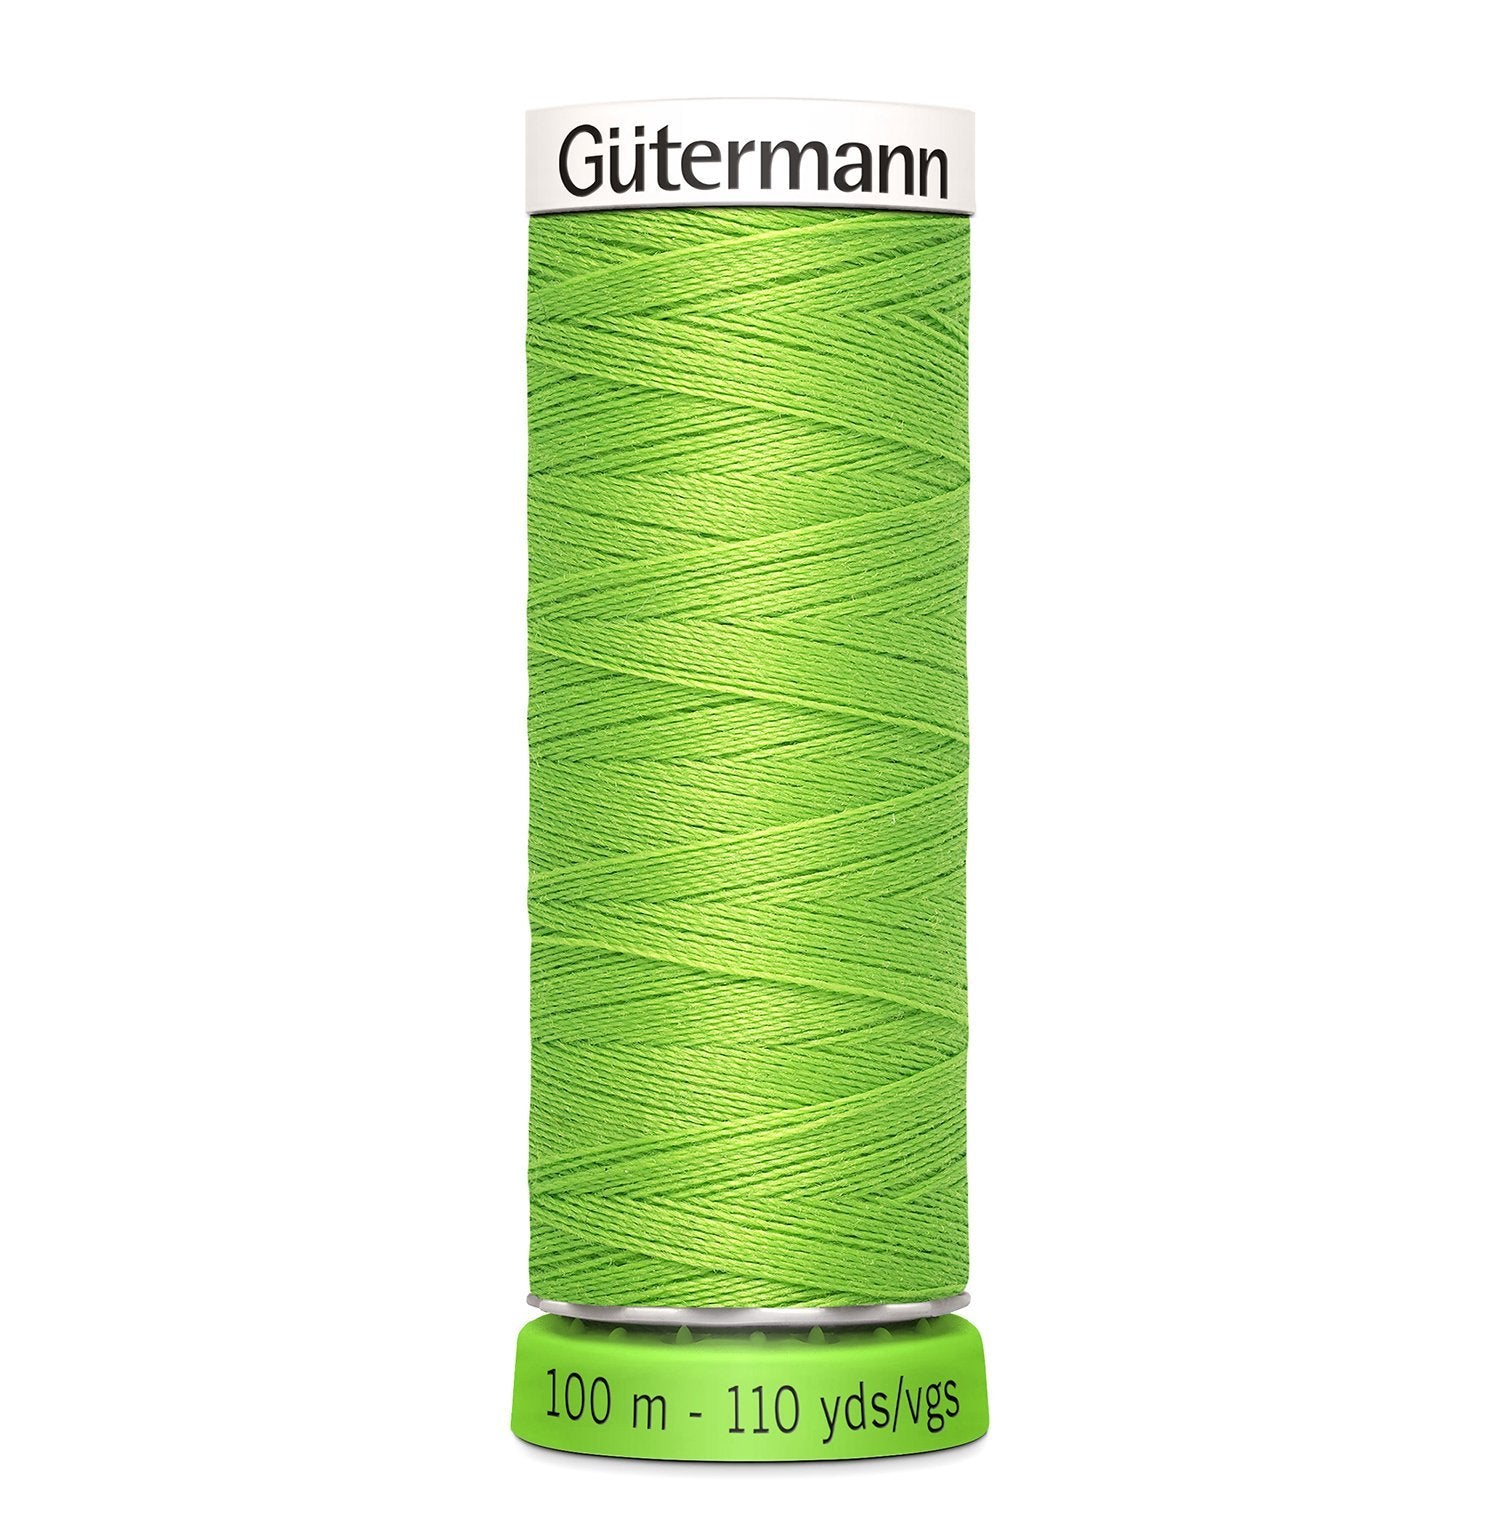 Gutermann Recycled Thread 100m, Colour 336 from Jaycotts Sewing Supplies